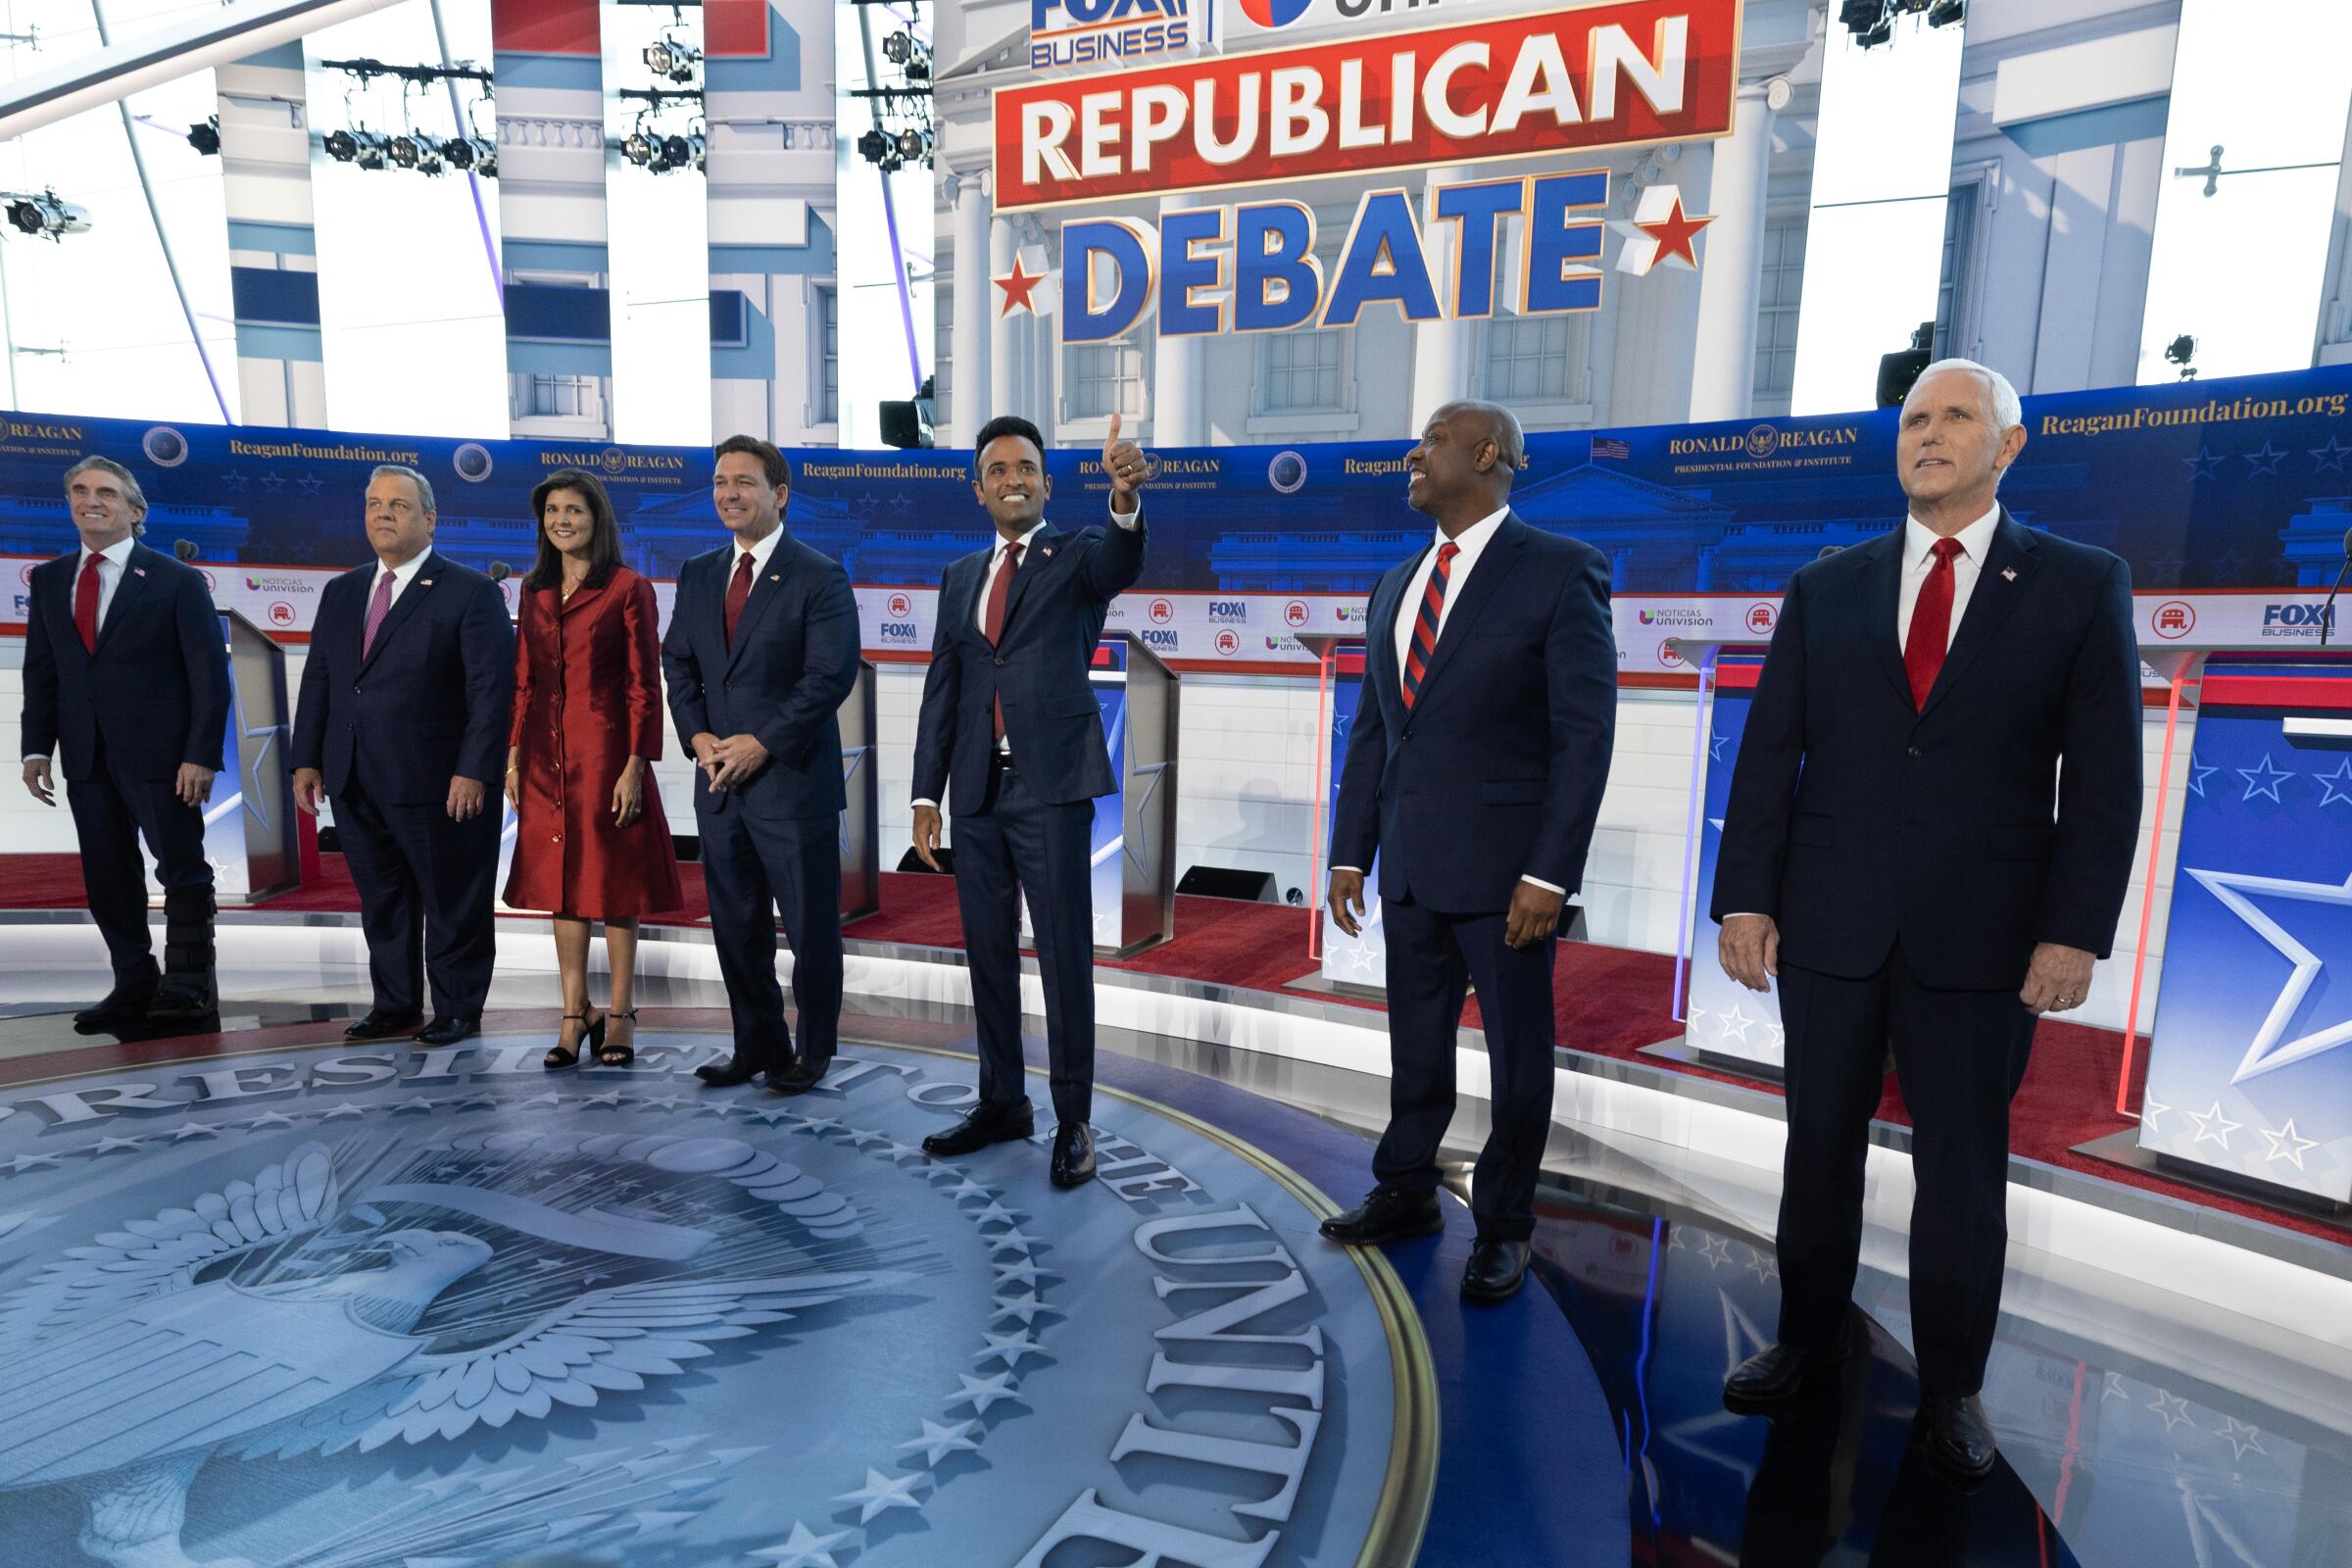 Seven candidates standing in a row onstage below a sign reading "Republican Debate"
